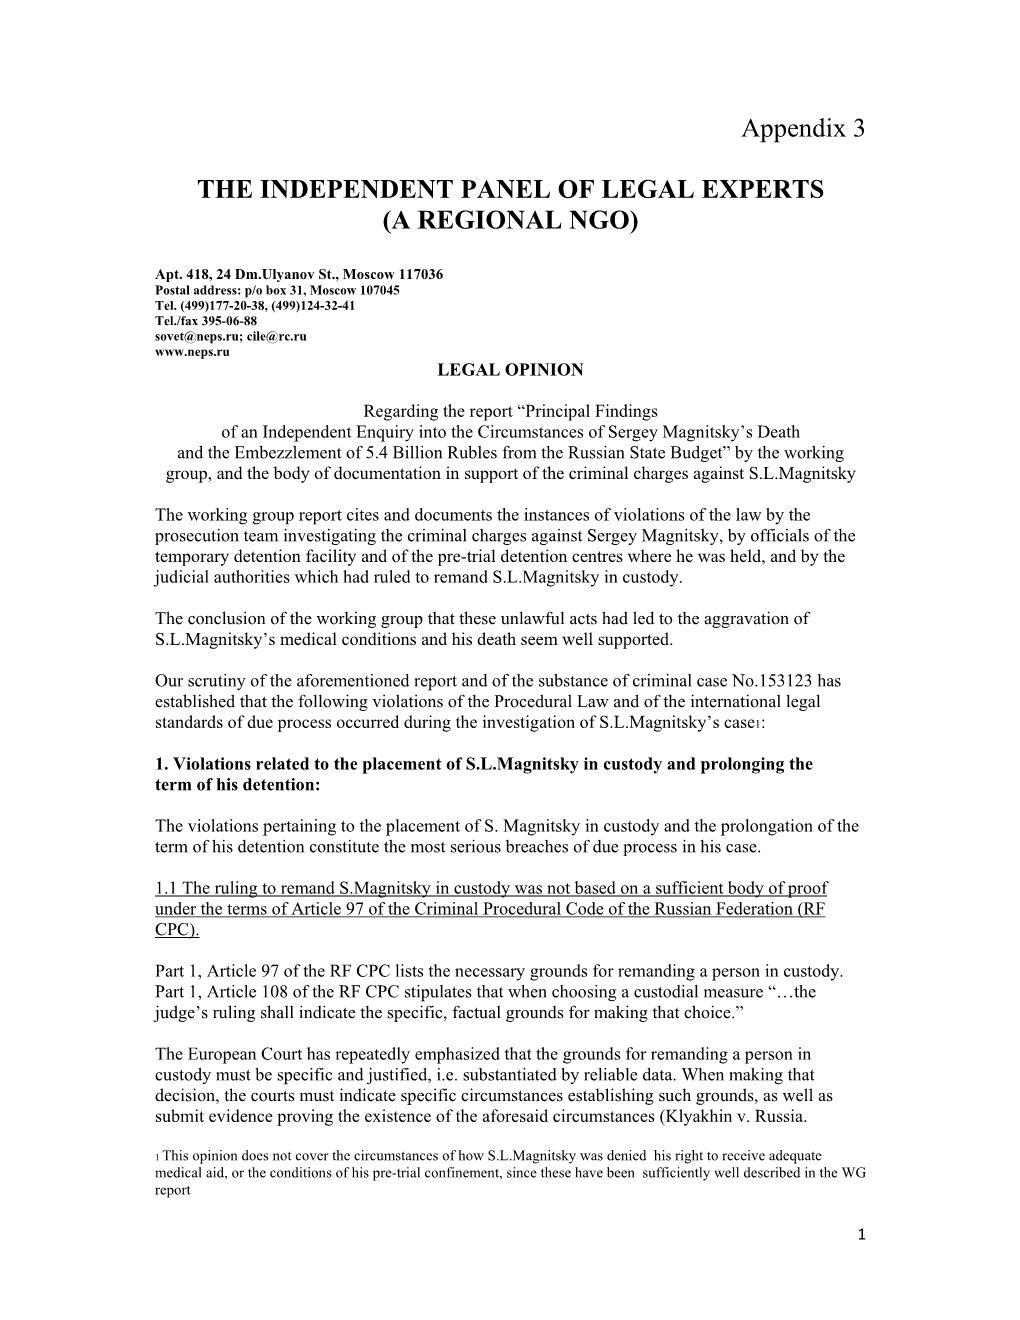 Appendix 3 the INDEPENDENT PANEL of LEGAL EXPERTS